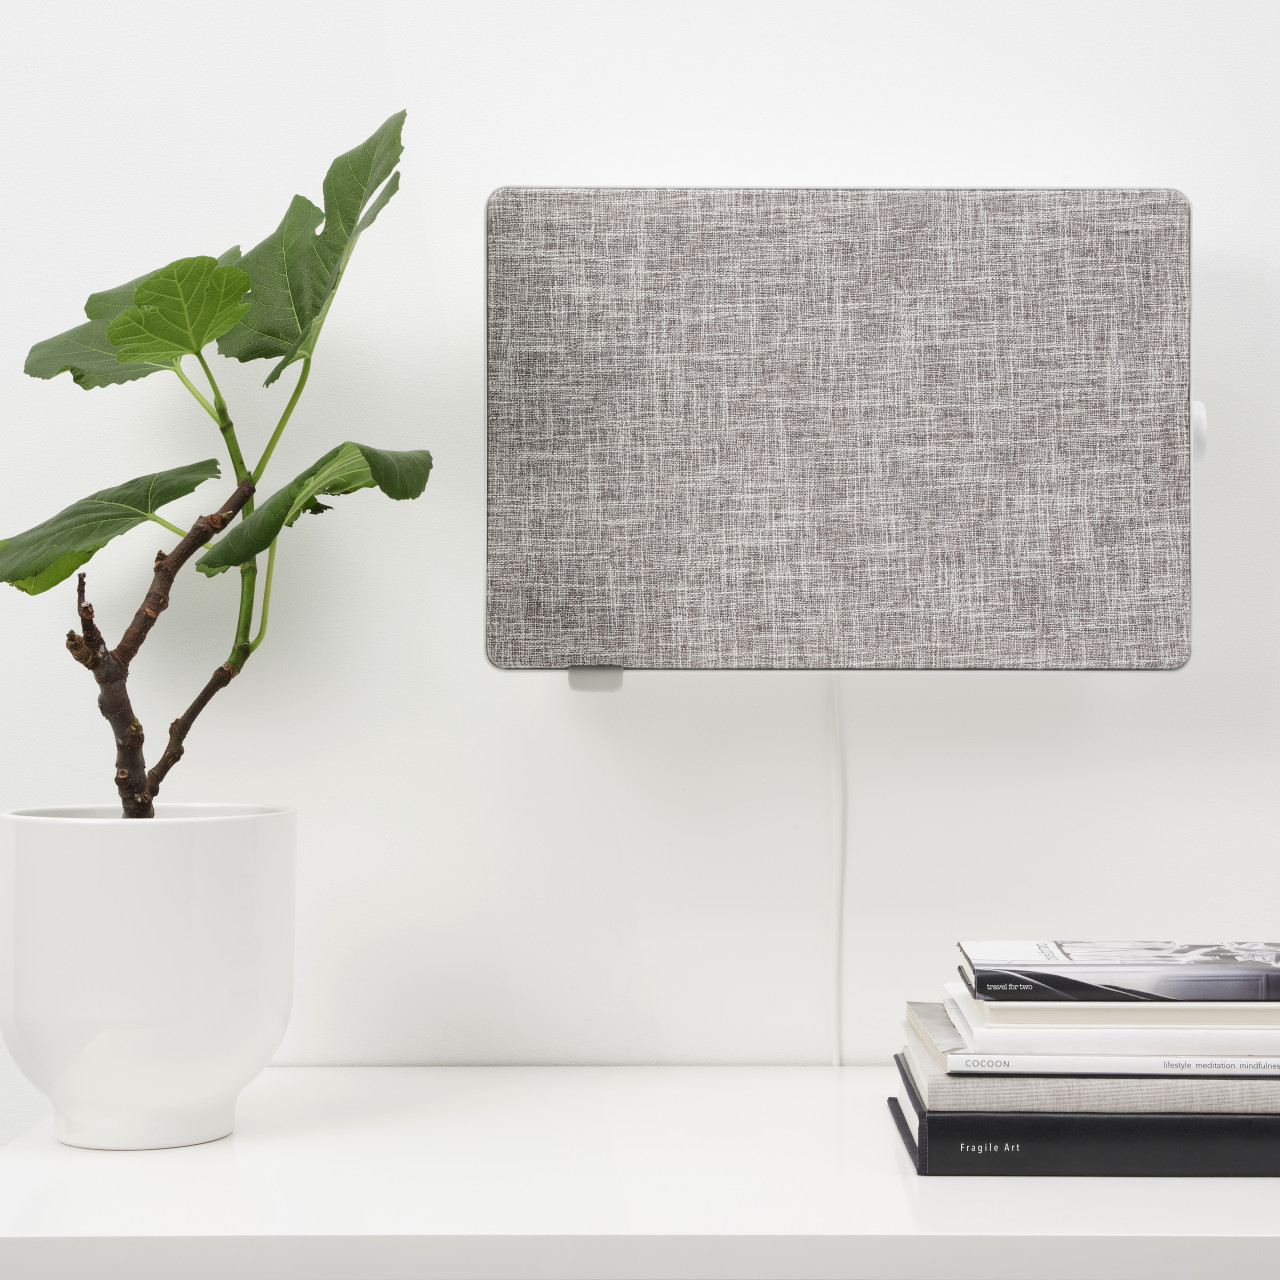 IKEA Breezes in With the FÖRNUFTIG Air Purifier